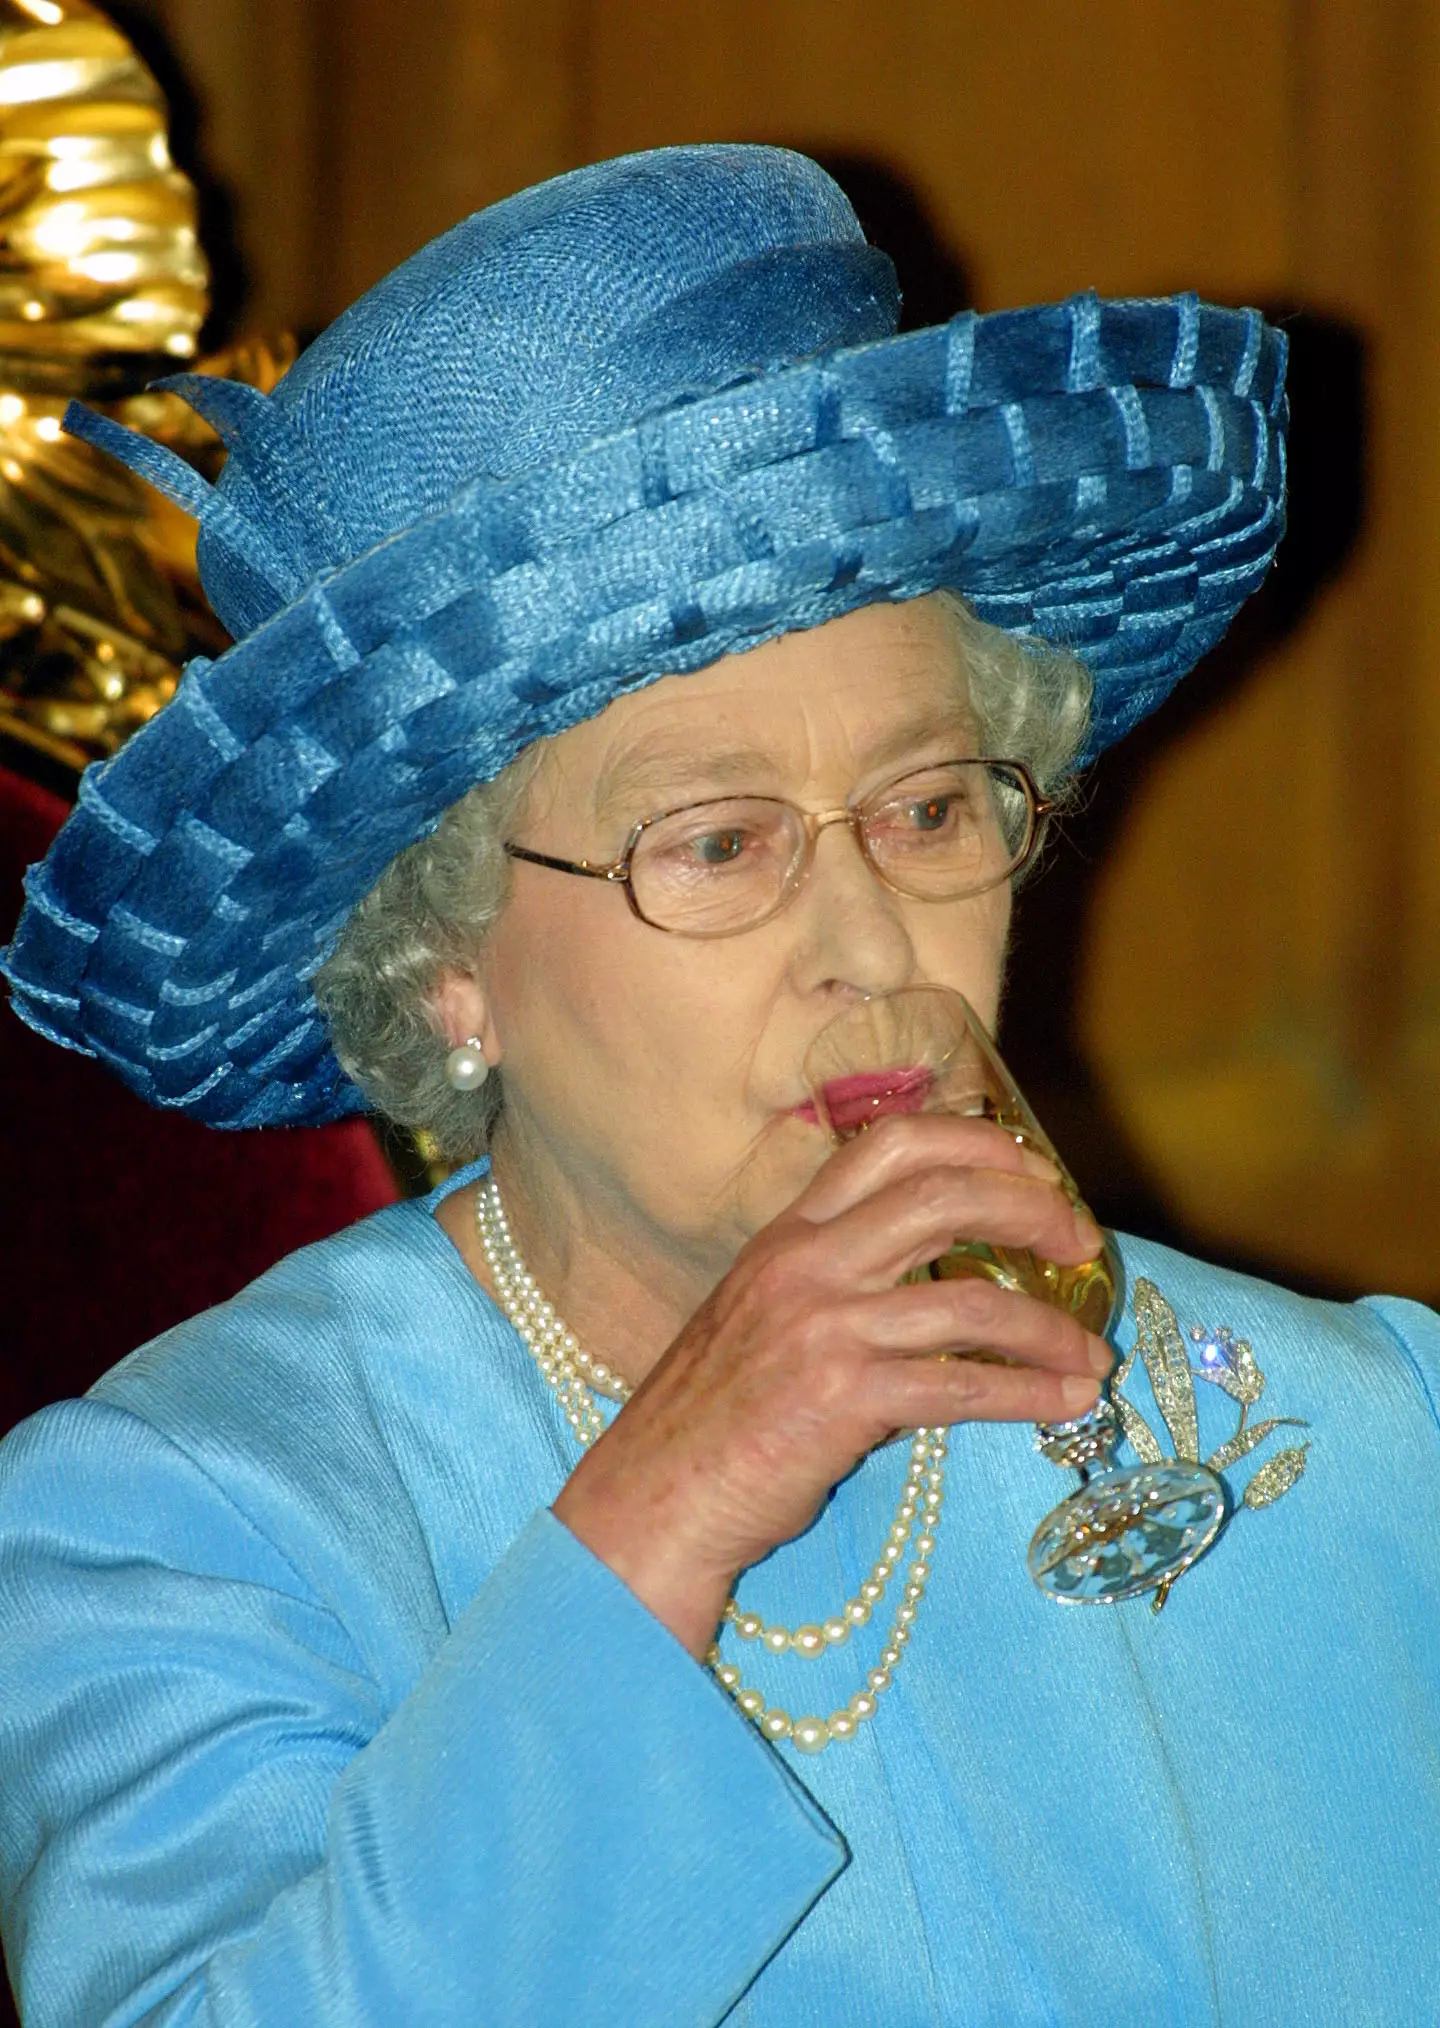 Rumour has it that the Queen's favourite tipple is a glass of gin and Dubonnet (